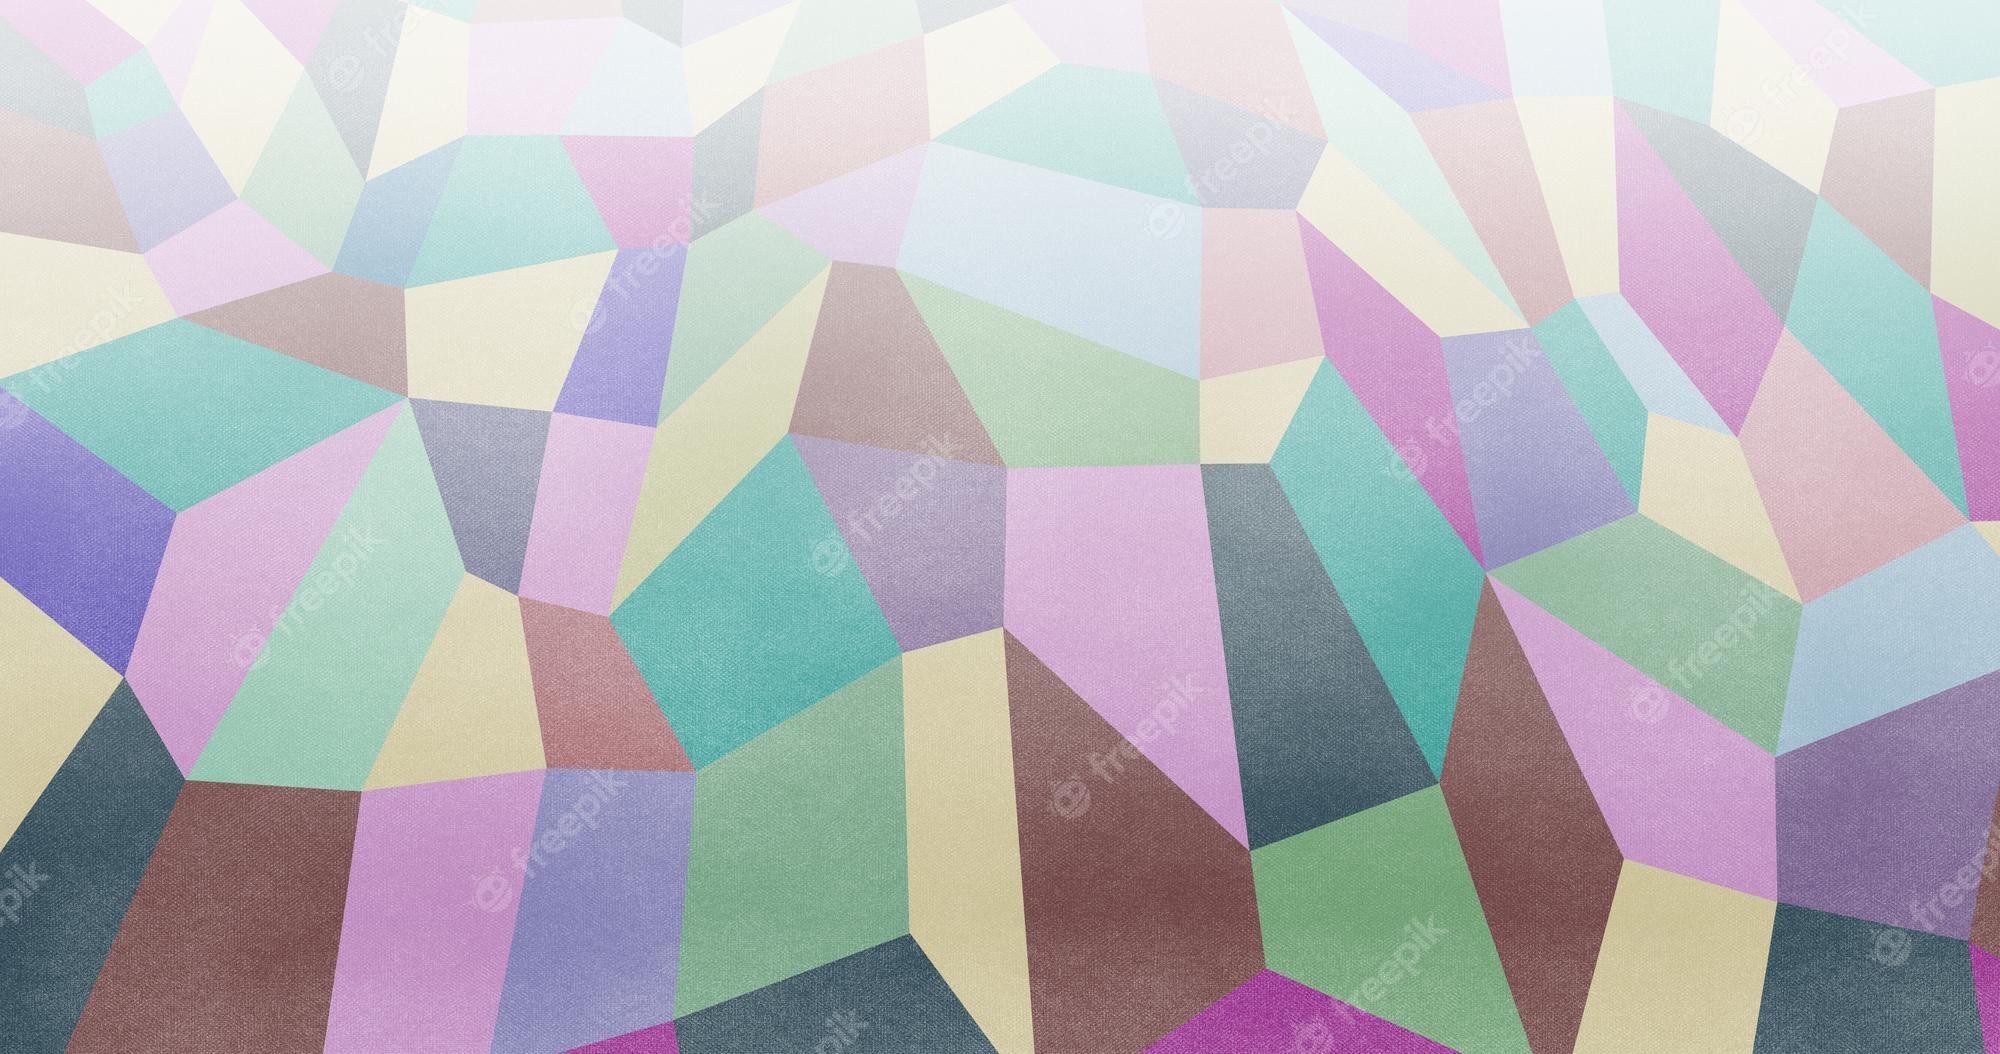 Premium Psd Abstract Colorful Geometric Background Modern